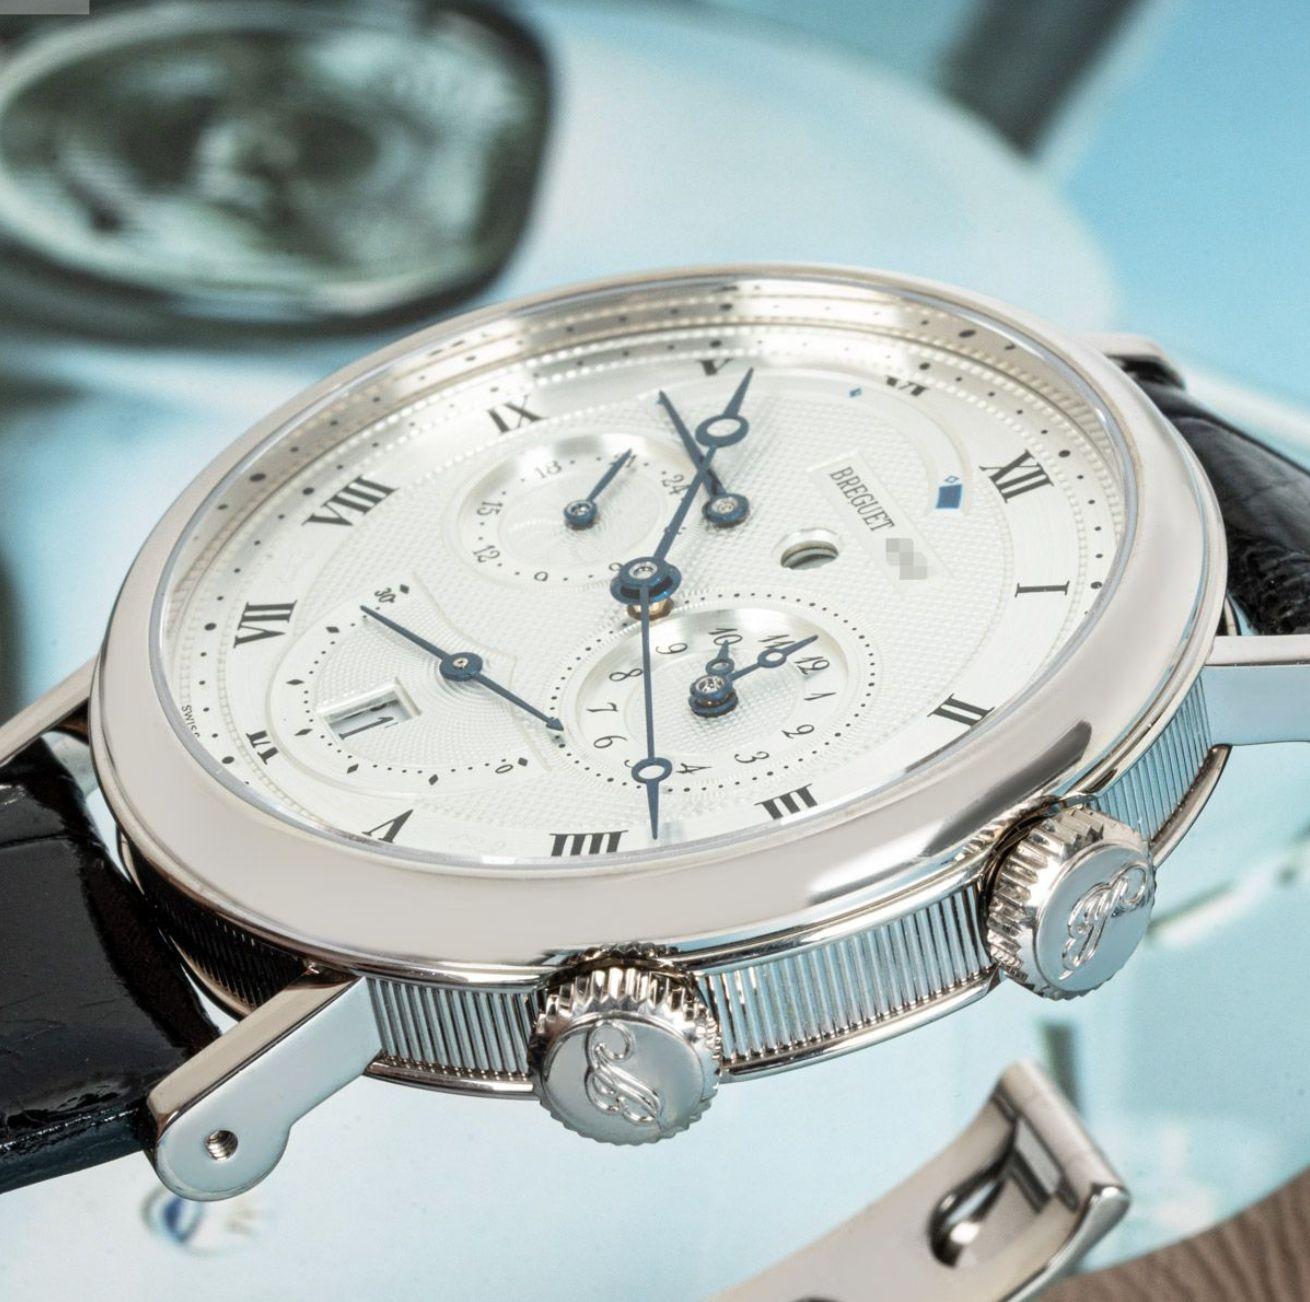 A white gold Le Reveil Du Tsar Classique wristwatch by Breguet. Featuring a silver dial with roman numerals and a date display. The watch also features a small second sub-dial, a second-time zone, a power reserve indicator and an alarm that can be